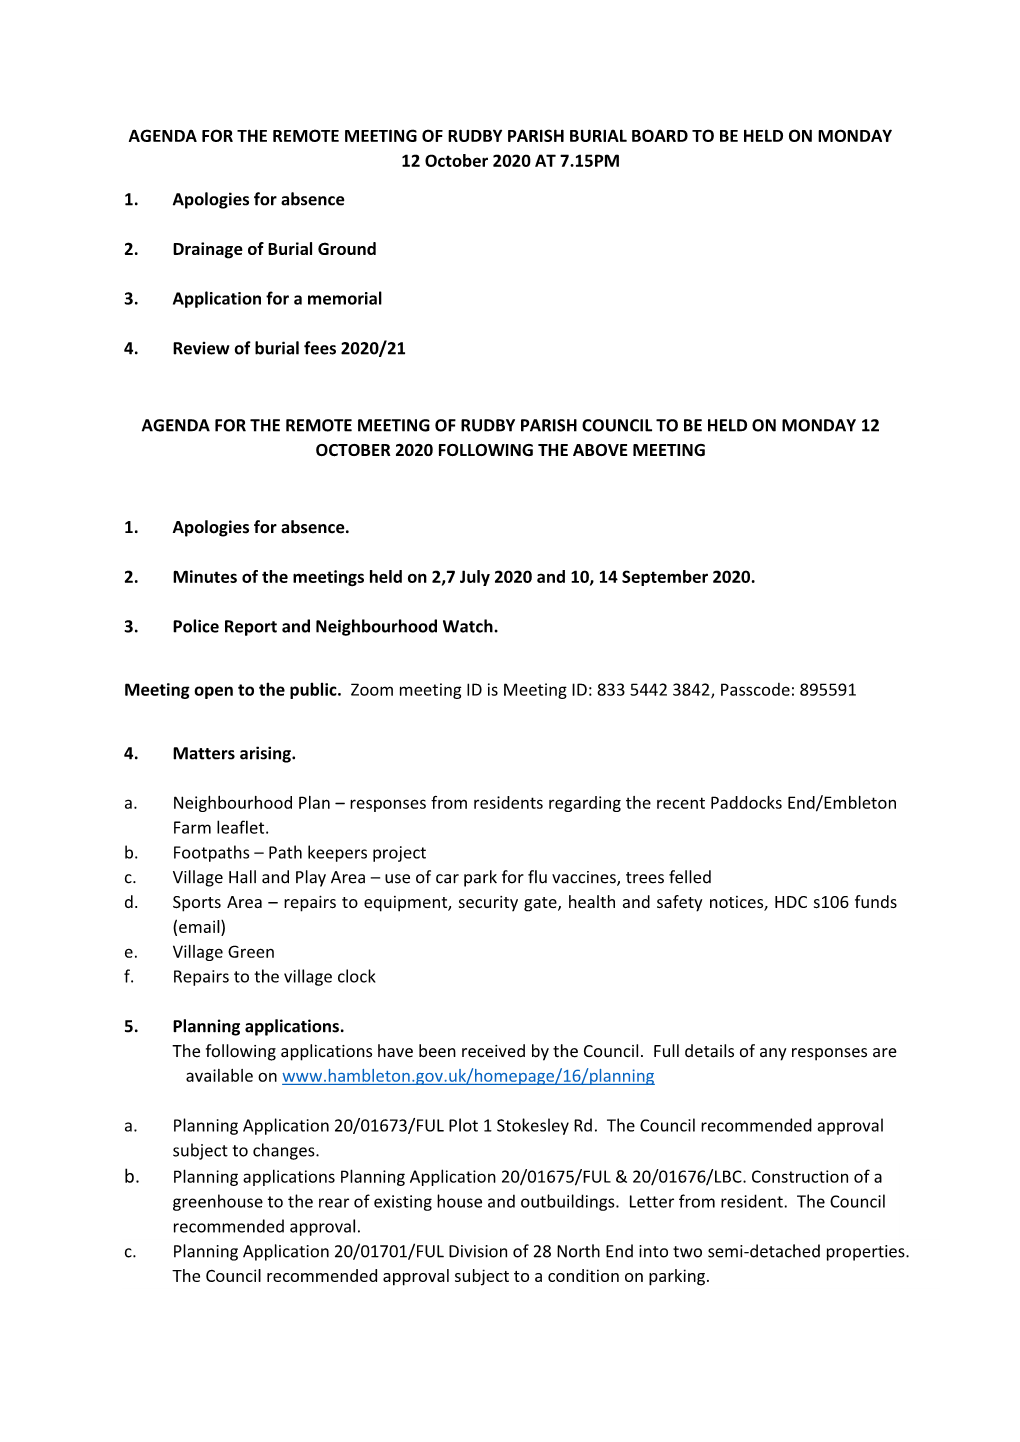 AGENDA for the REMOTE MEETING of RUDBY PARISH BURIAL BOARD to BE HELD on MONDAY 12 October 2020 at 7.15PM